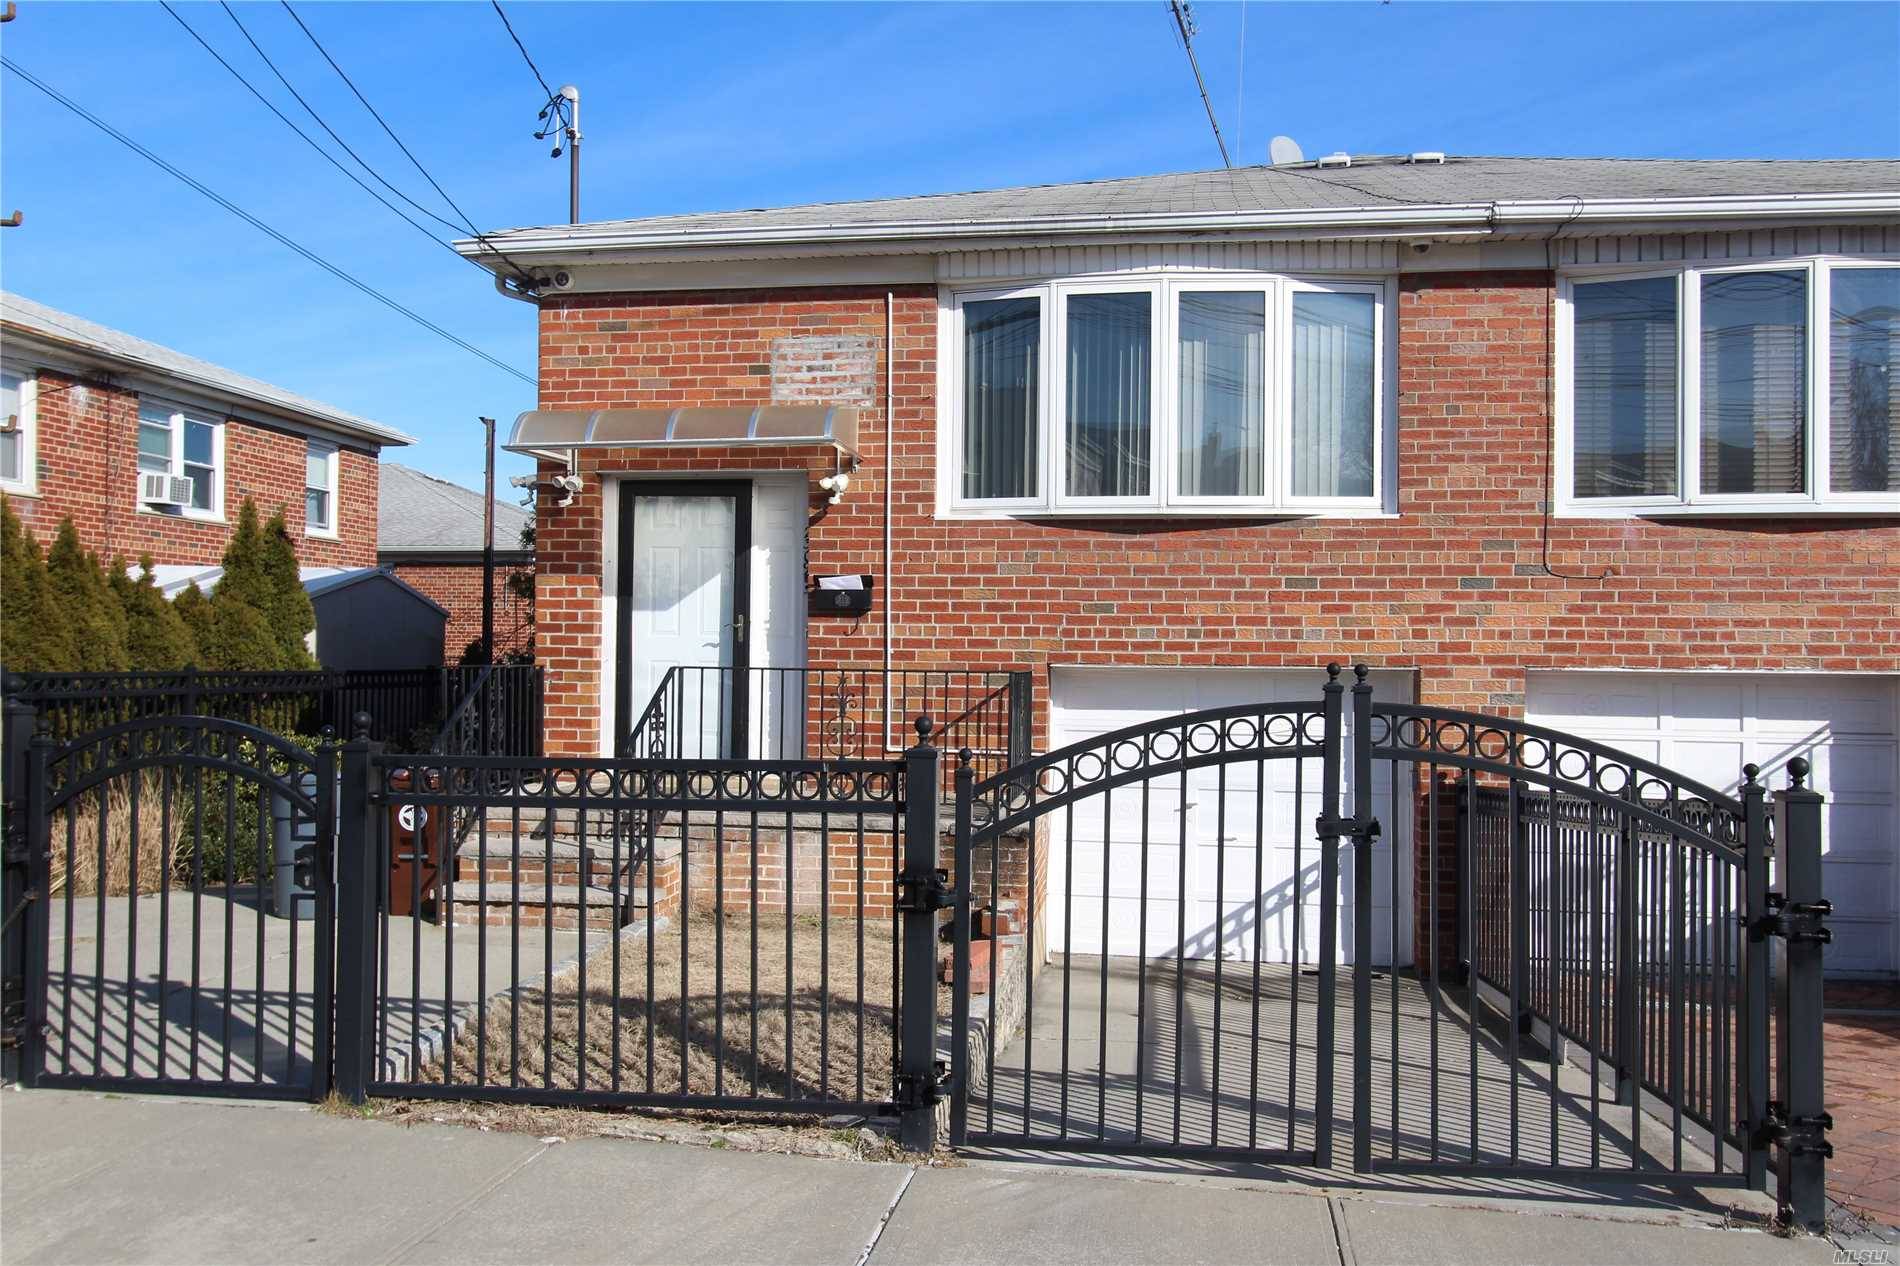 Semi Detached Brick Two Family Home.